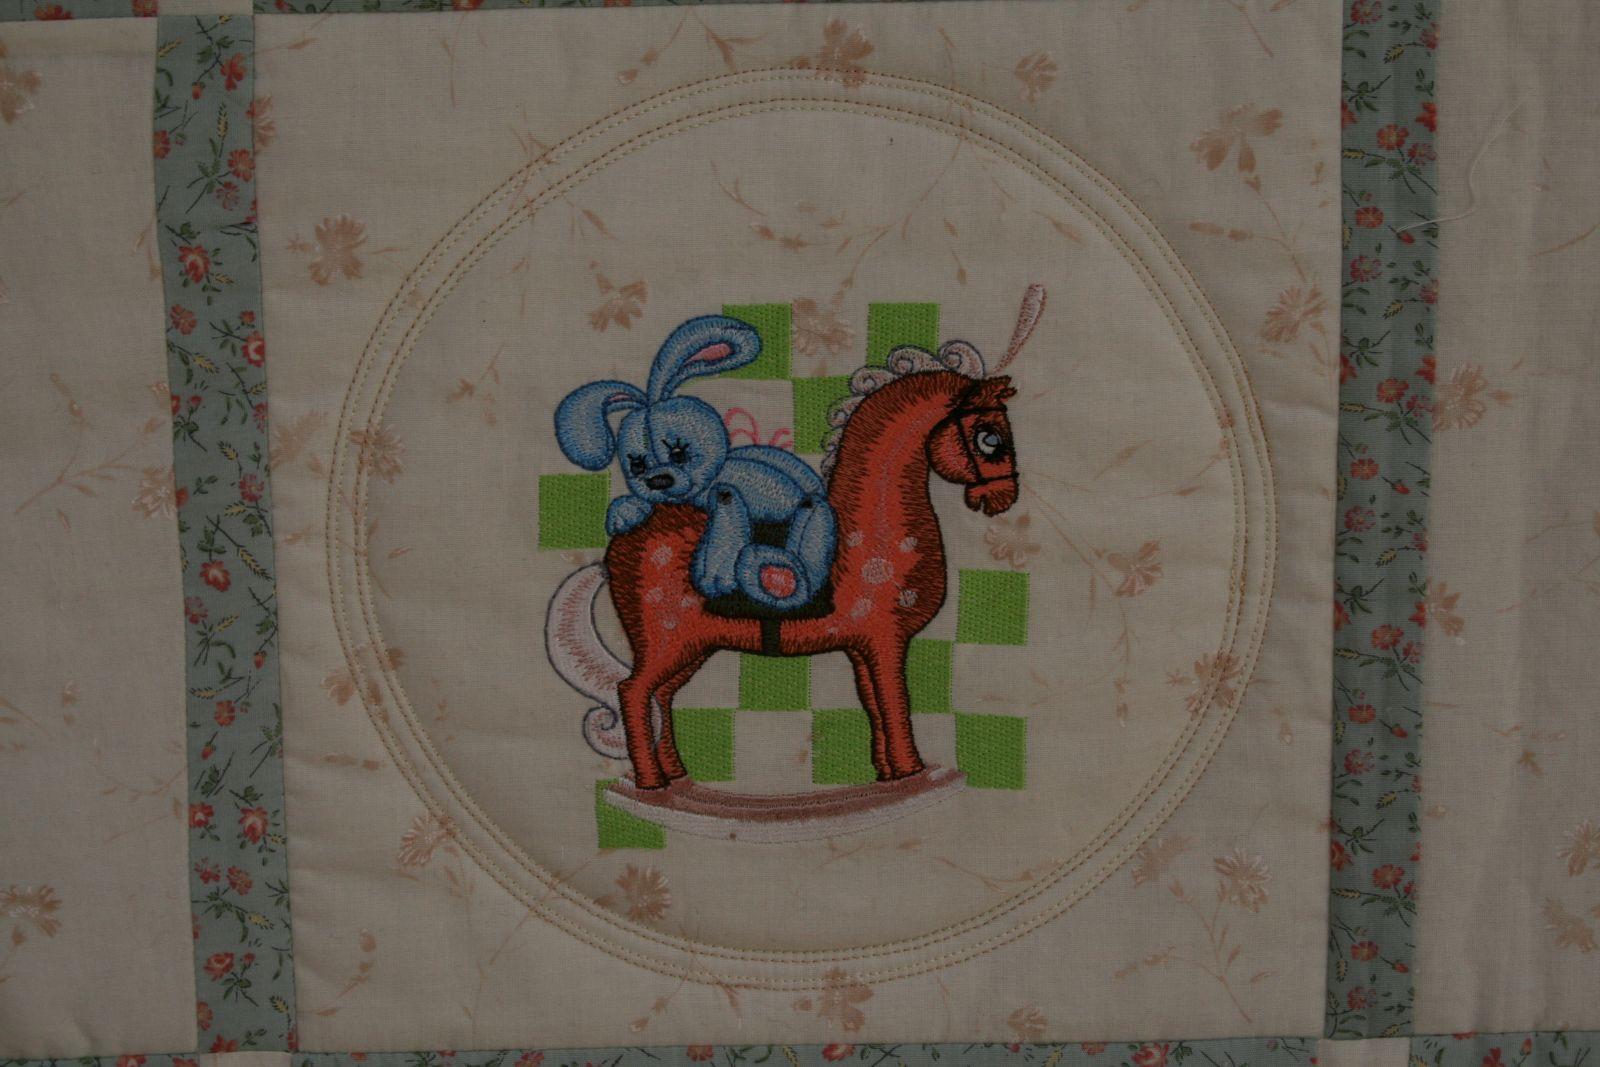 Rabbit in horse embroidery in quilt